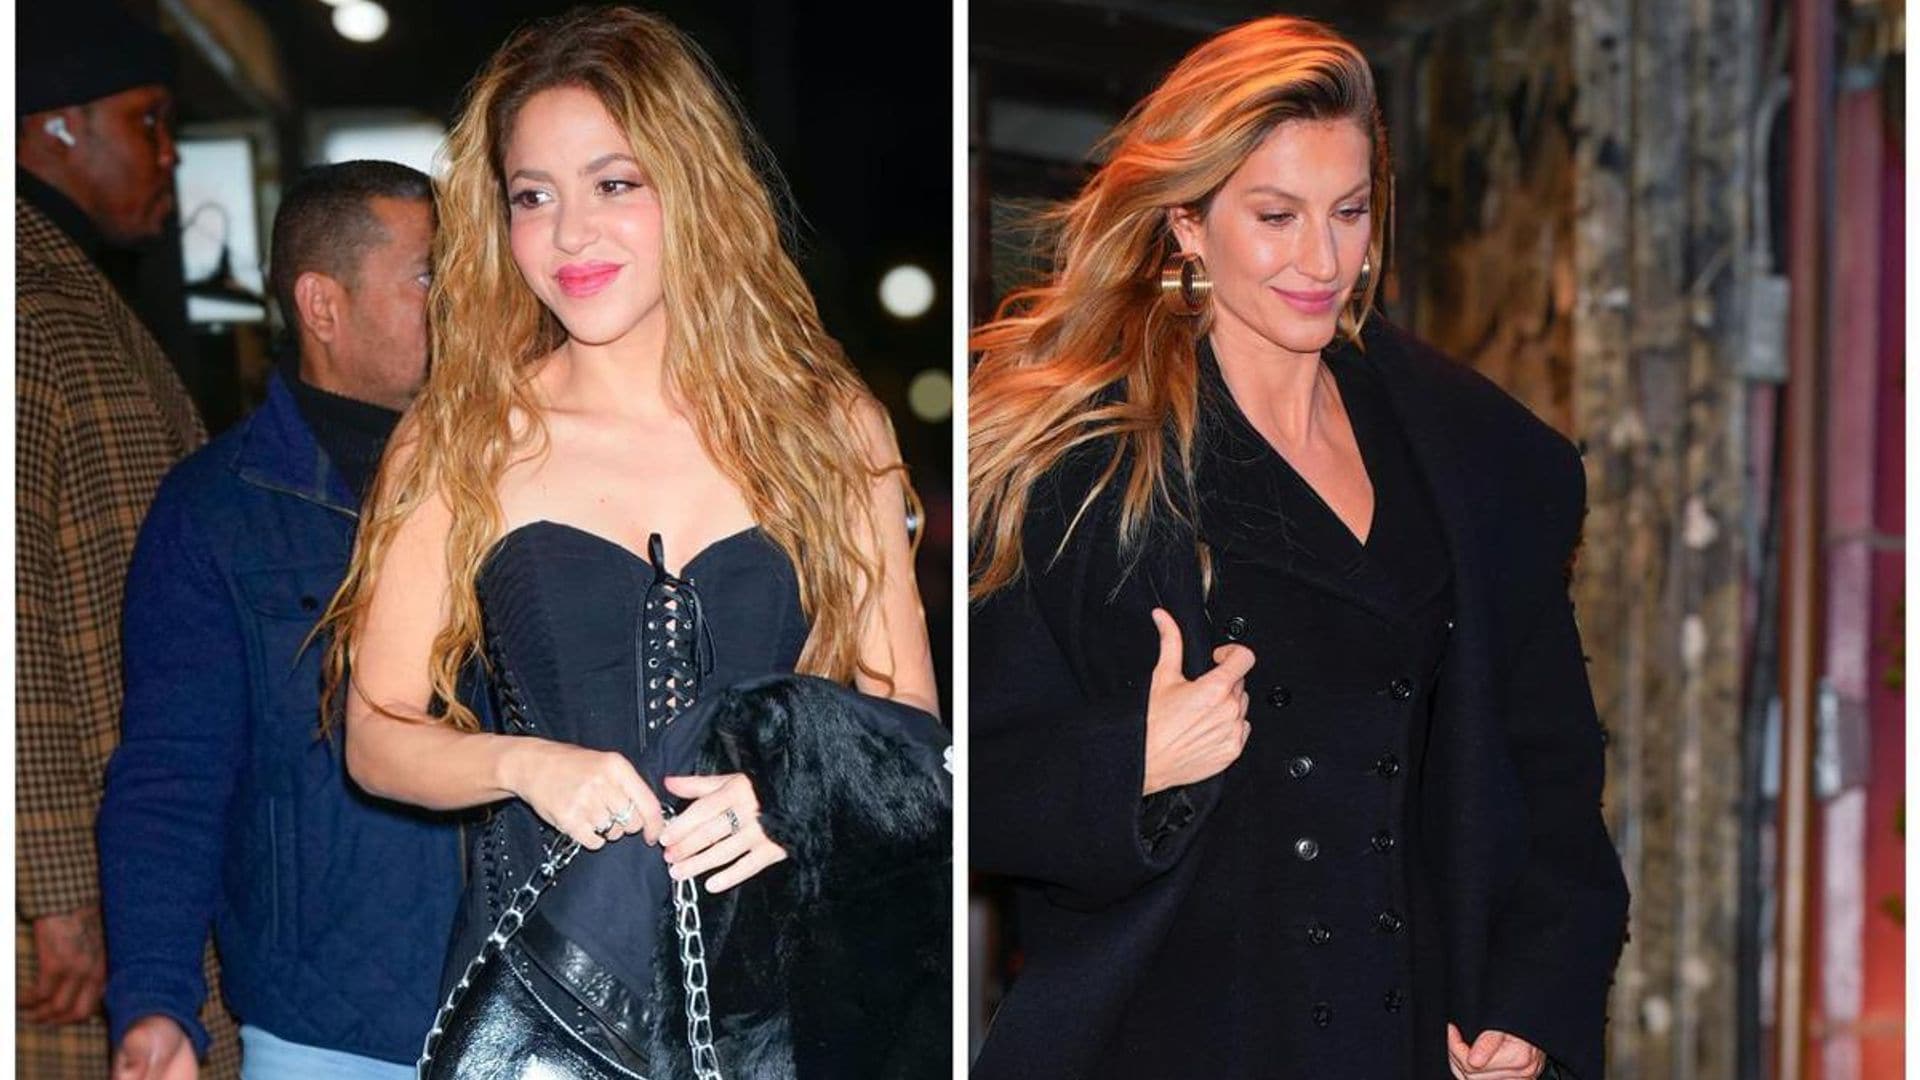 Shakira’s friendship with Gisele Bündchen and her life in Miami